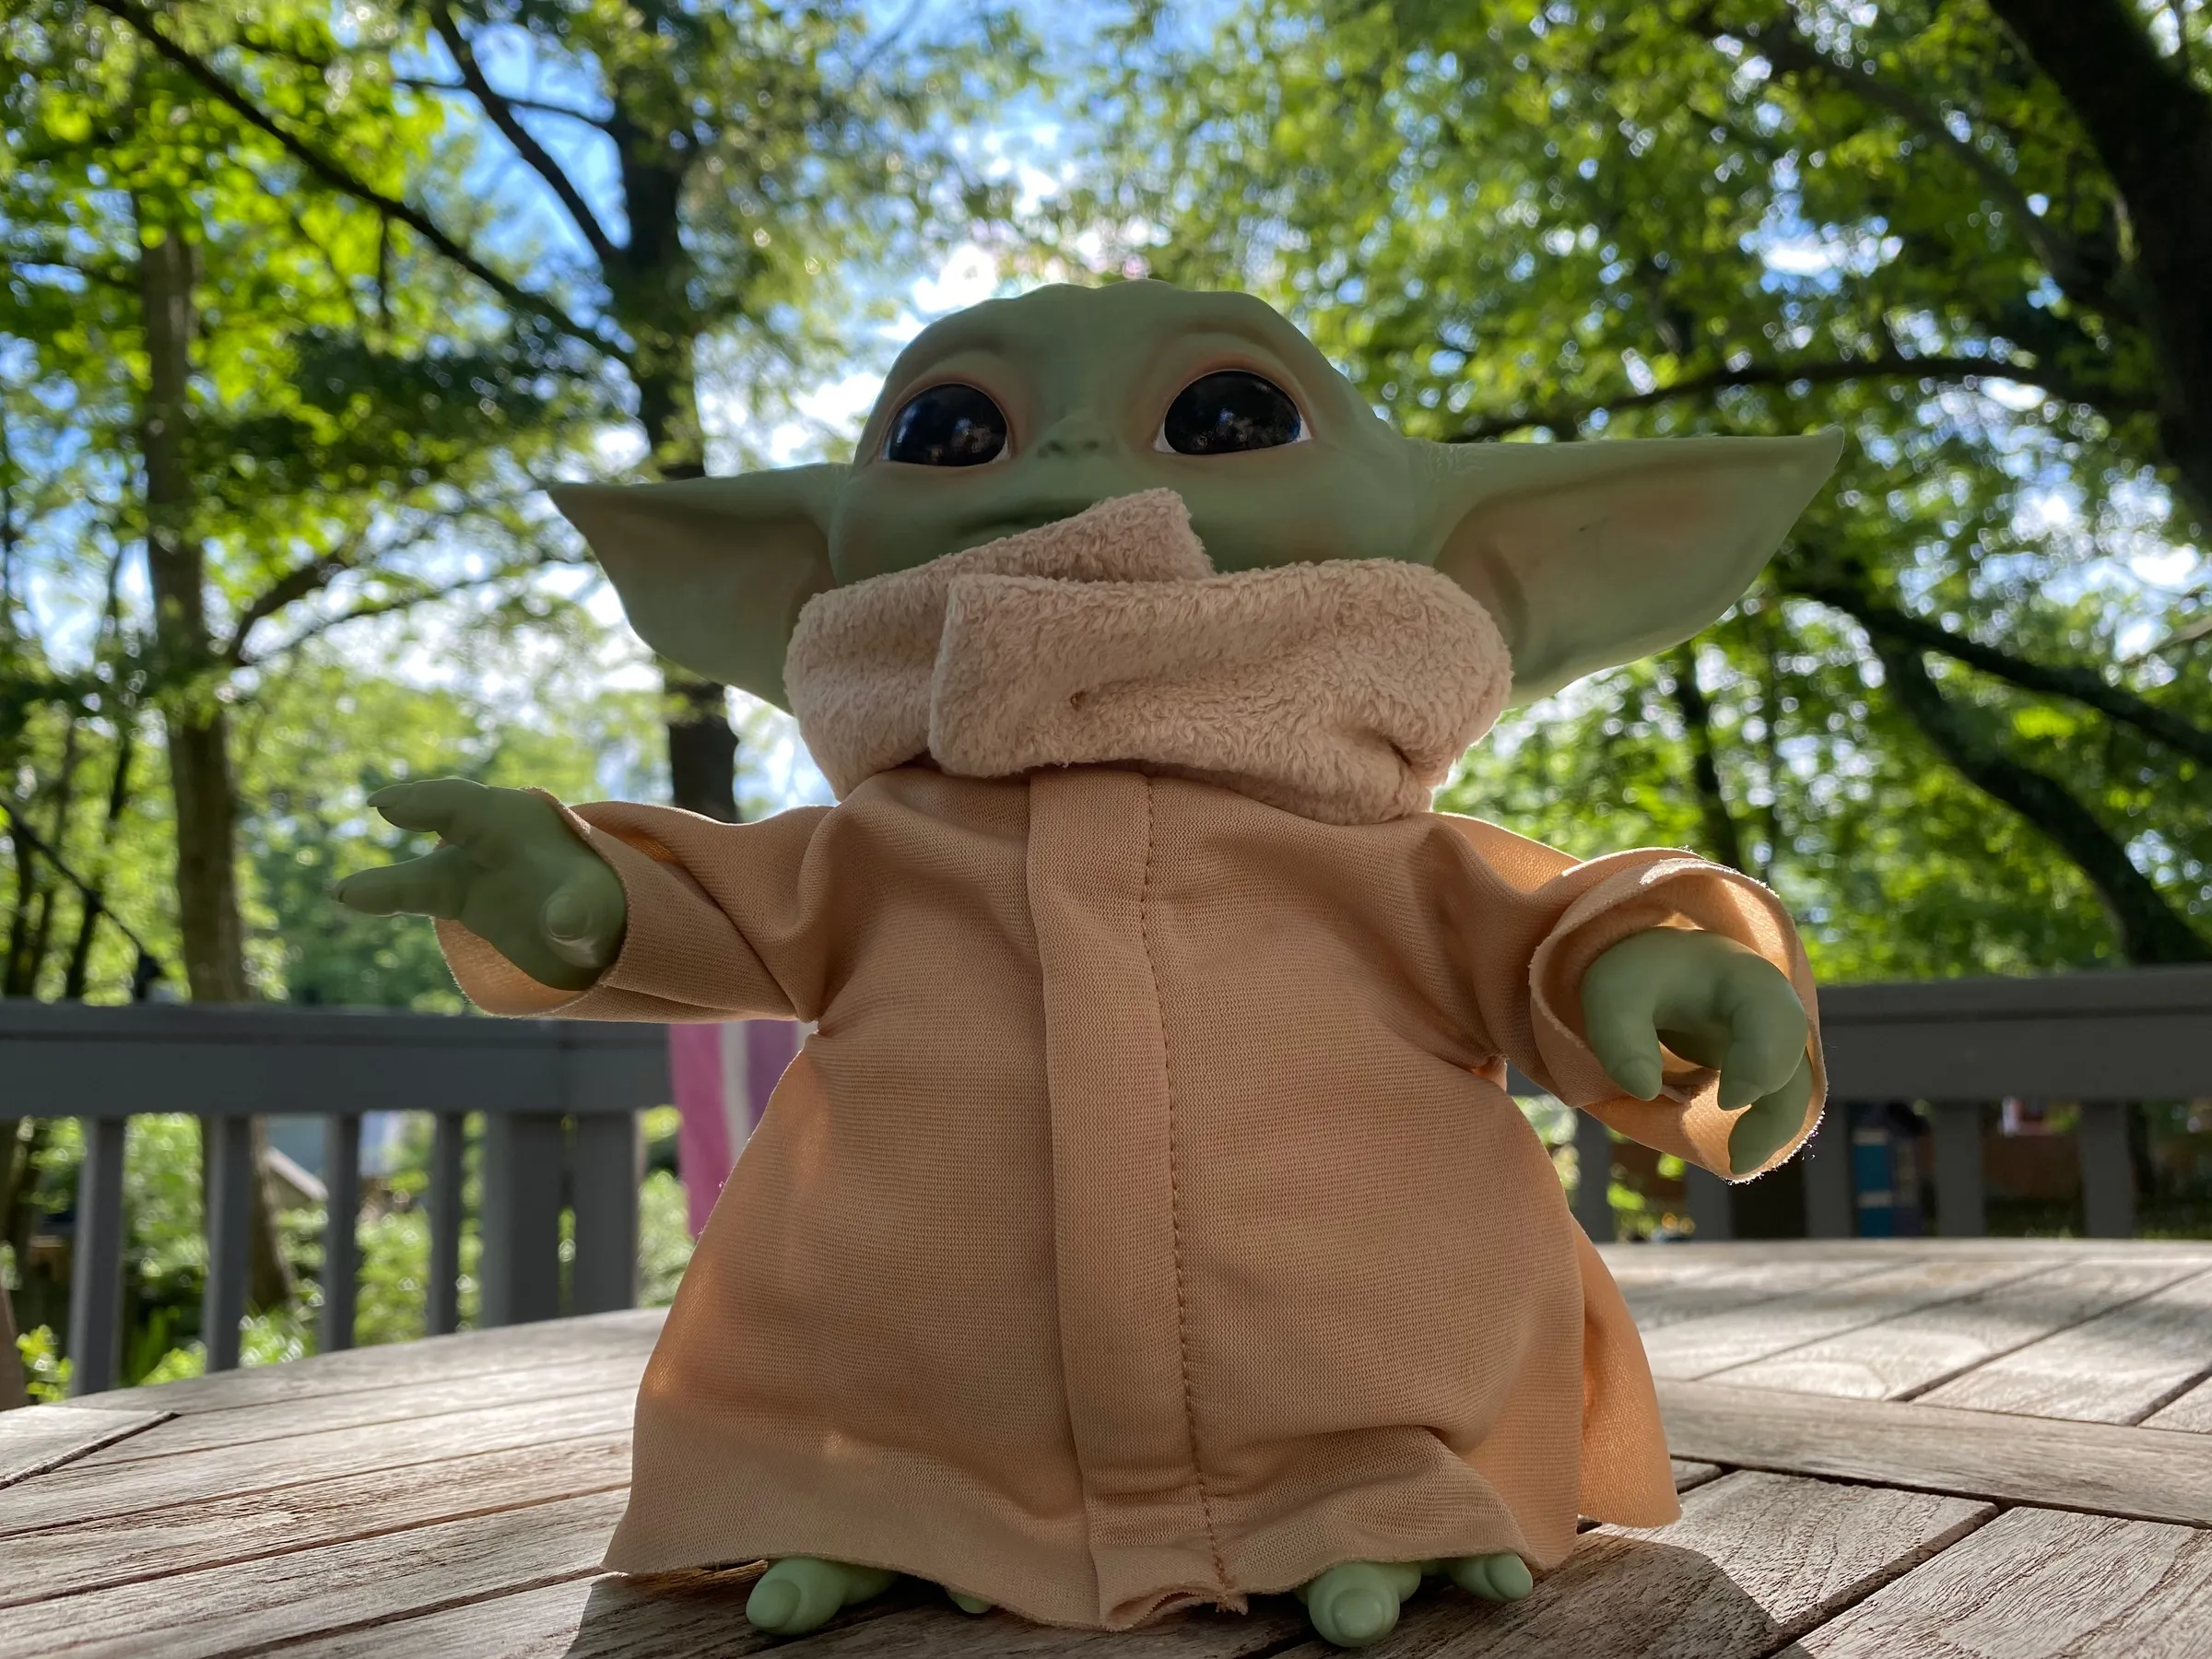 Baby Yoda toy on a table